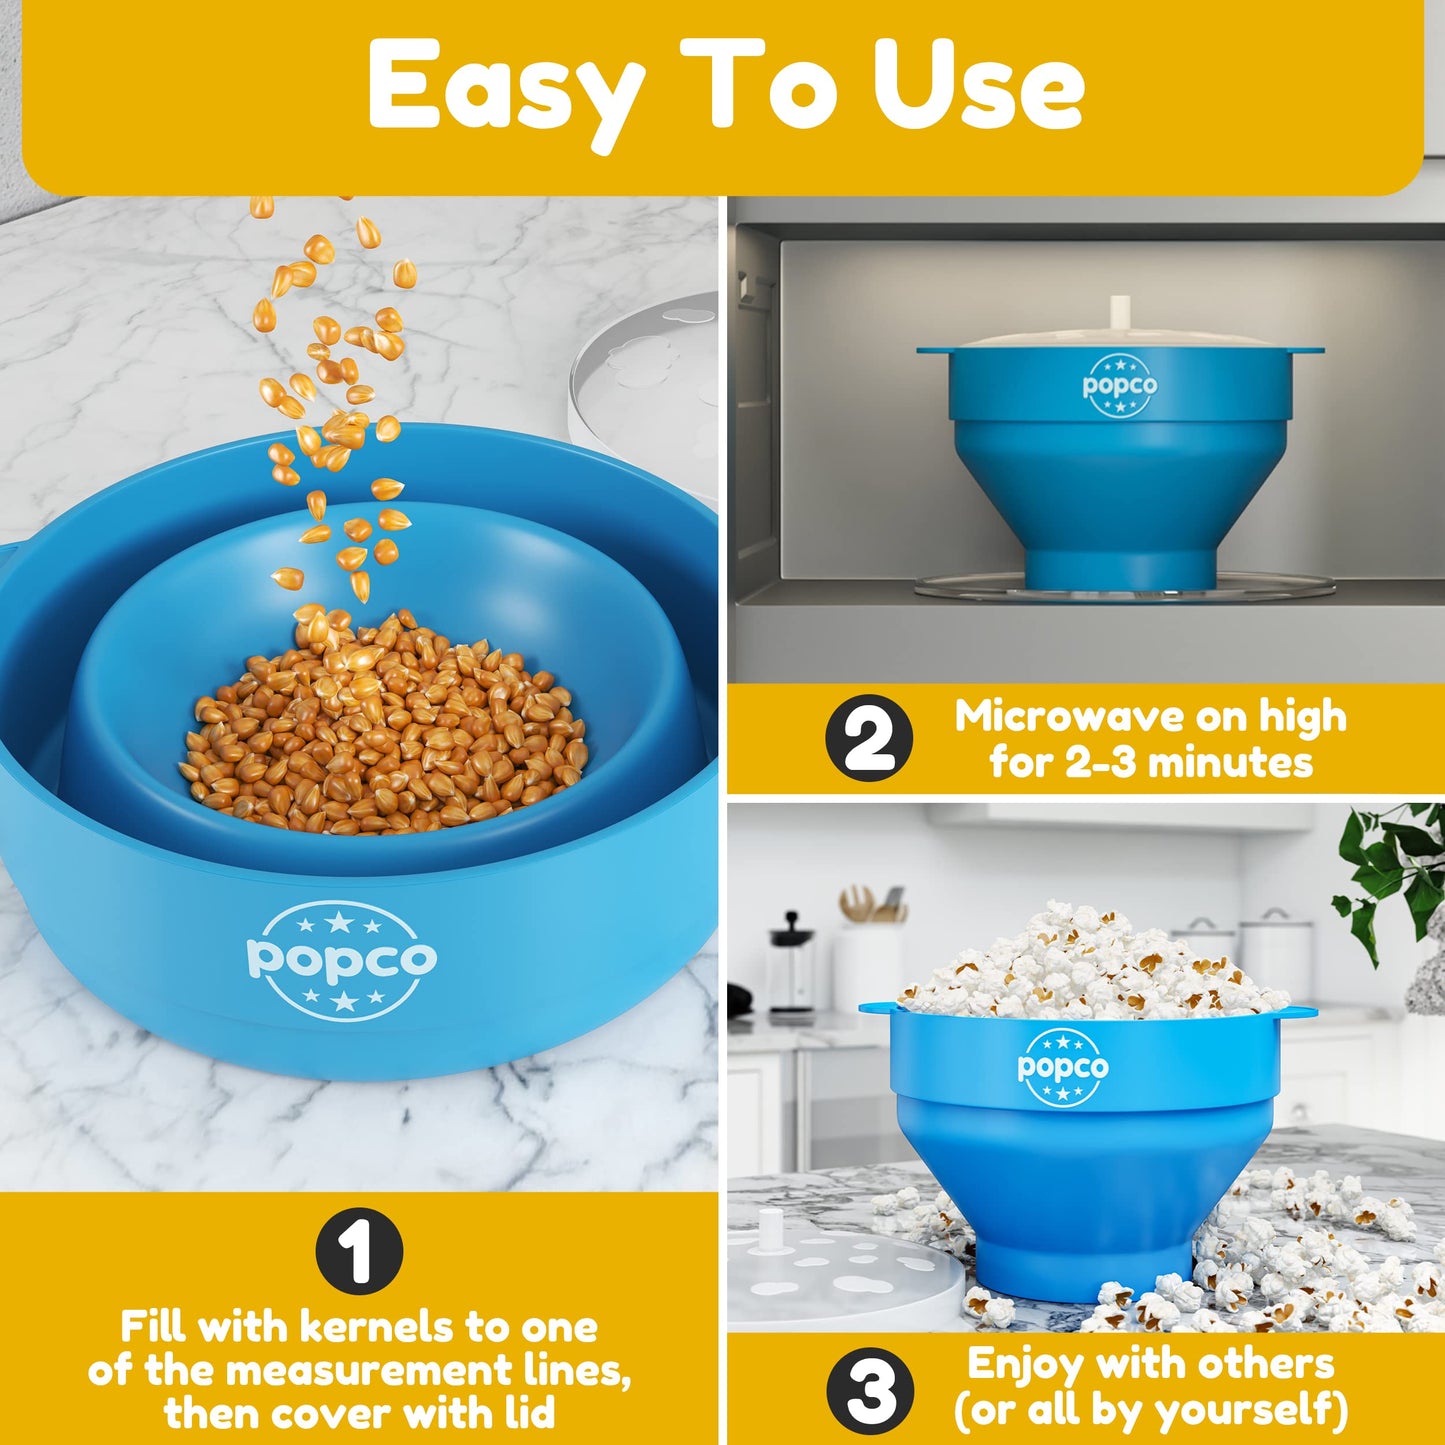 The Original Popco Silicone Microwave Popcorn Popper with Handles, Silicone Popcorn Maker, Collapsible Popcorn Bowls Bpa Free and Dishwasher Safe - 15 Colors Available (AQUA)